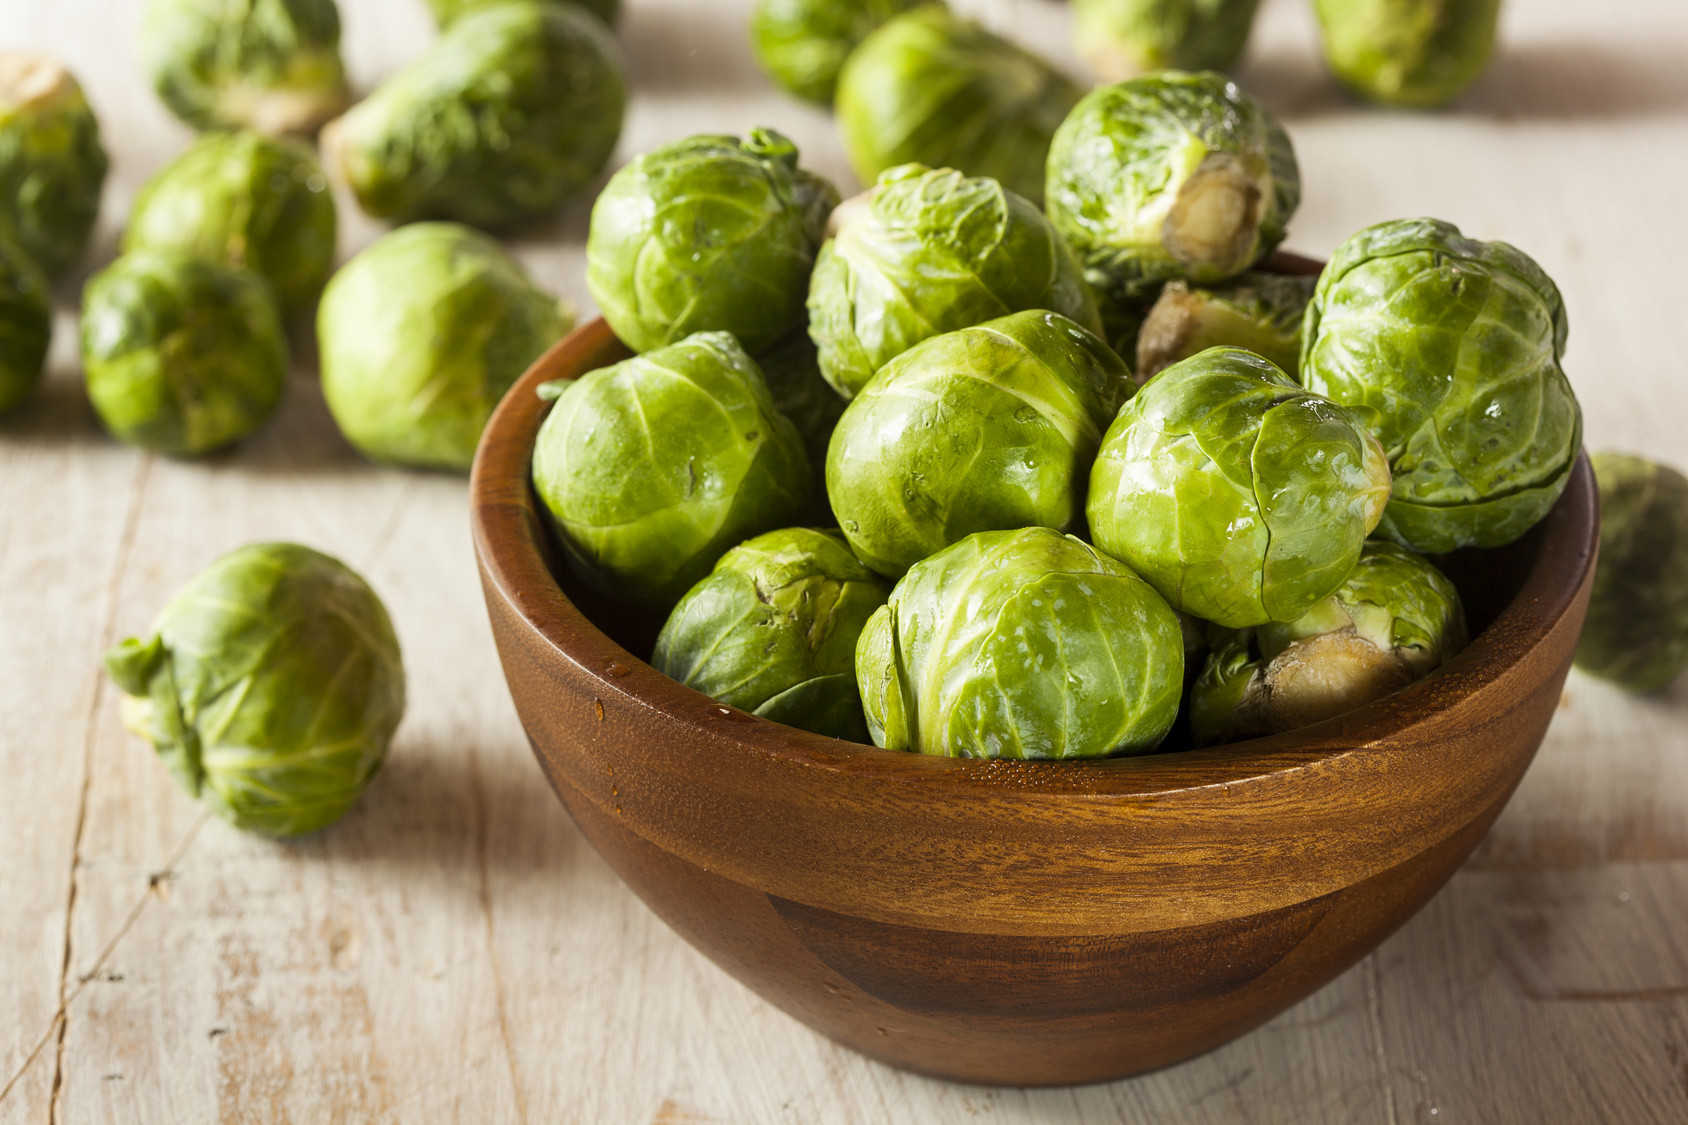 Brussels Sprouts Thanksgiving Side Dishes
 Brussels Sprouts Side Dish Recipe For Thanksgiving